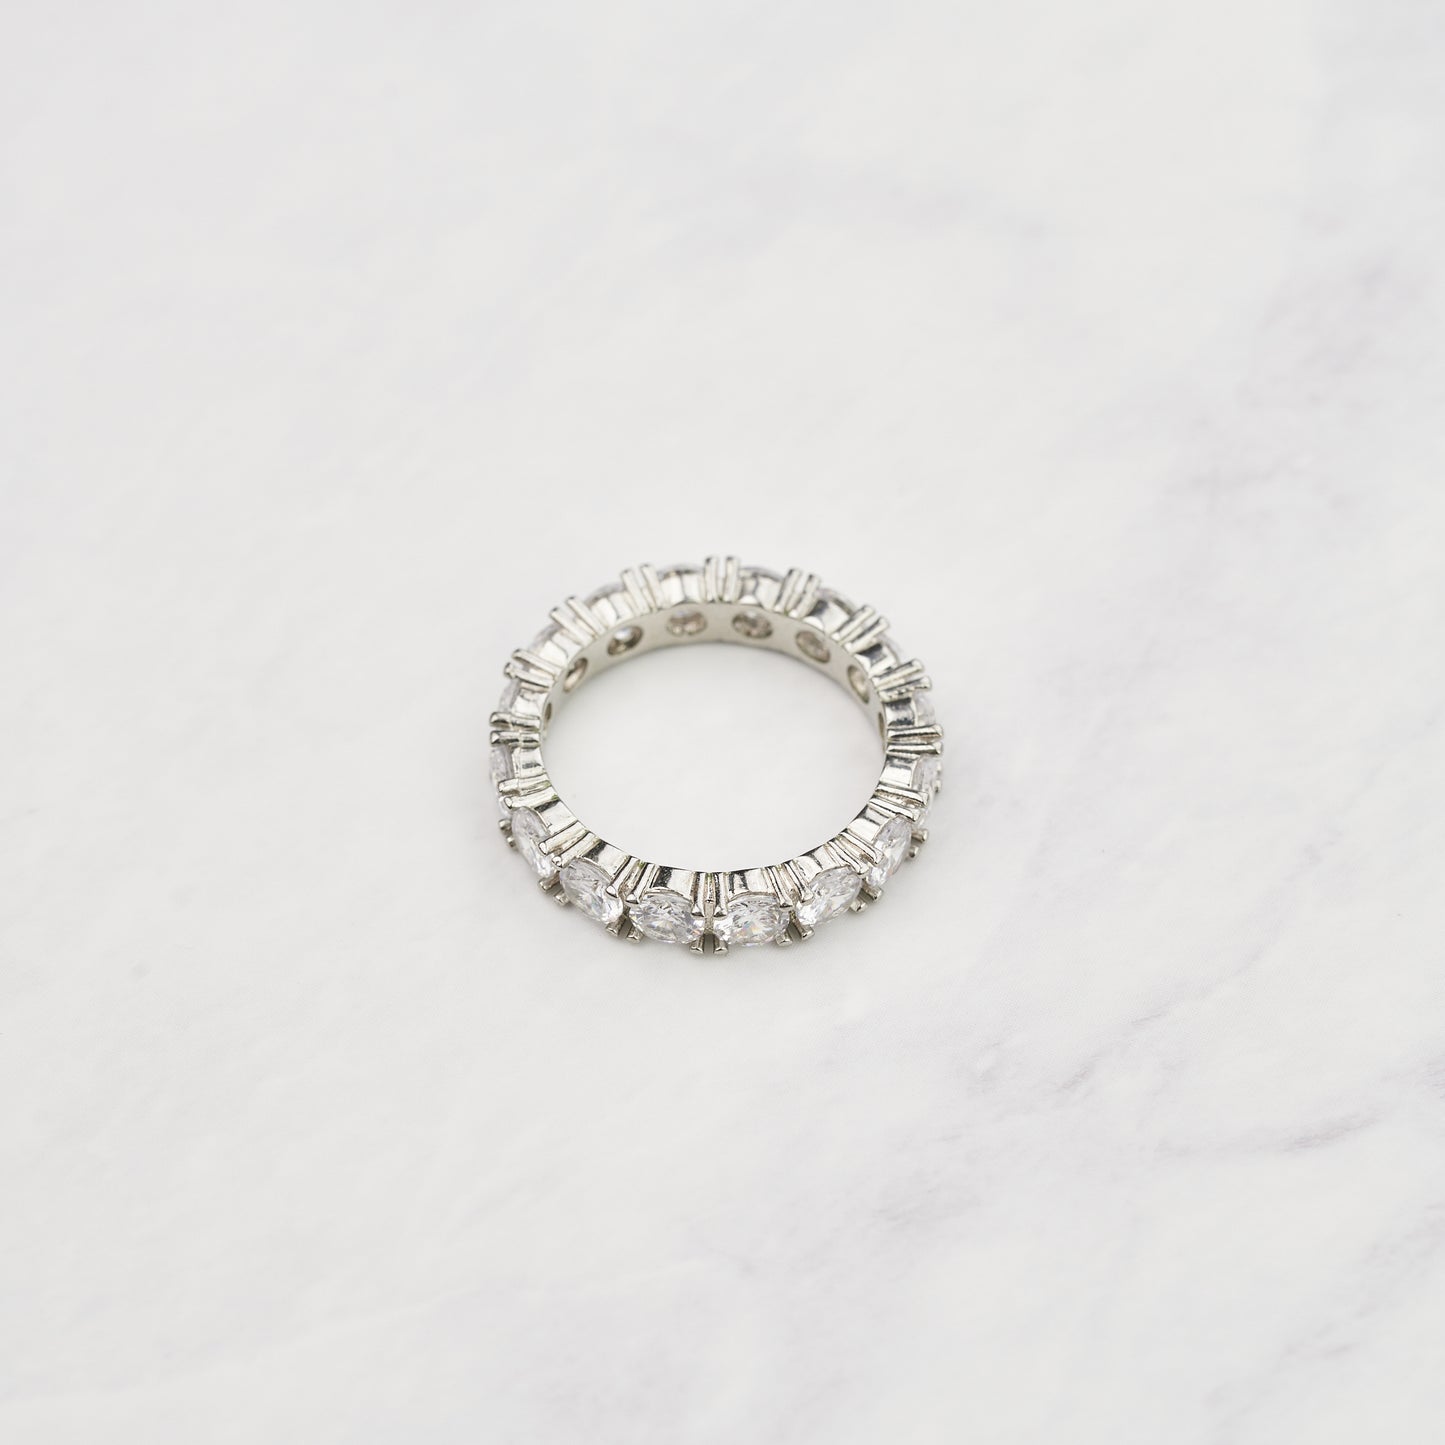 Eternity Ring in White Gold - 4mm